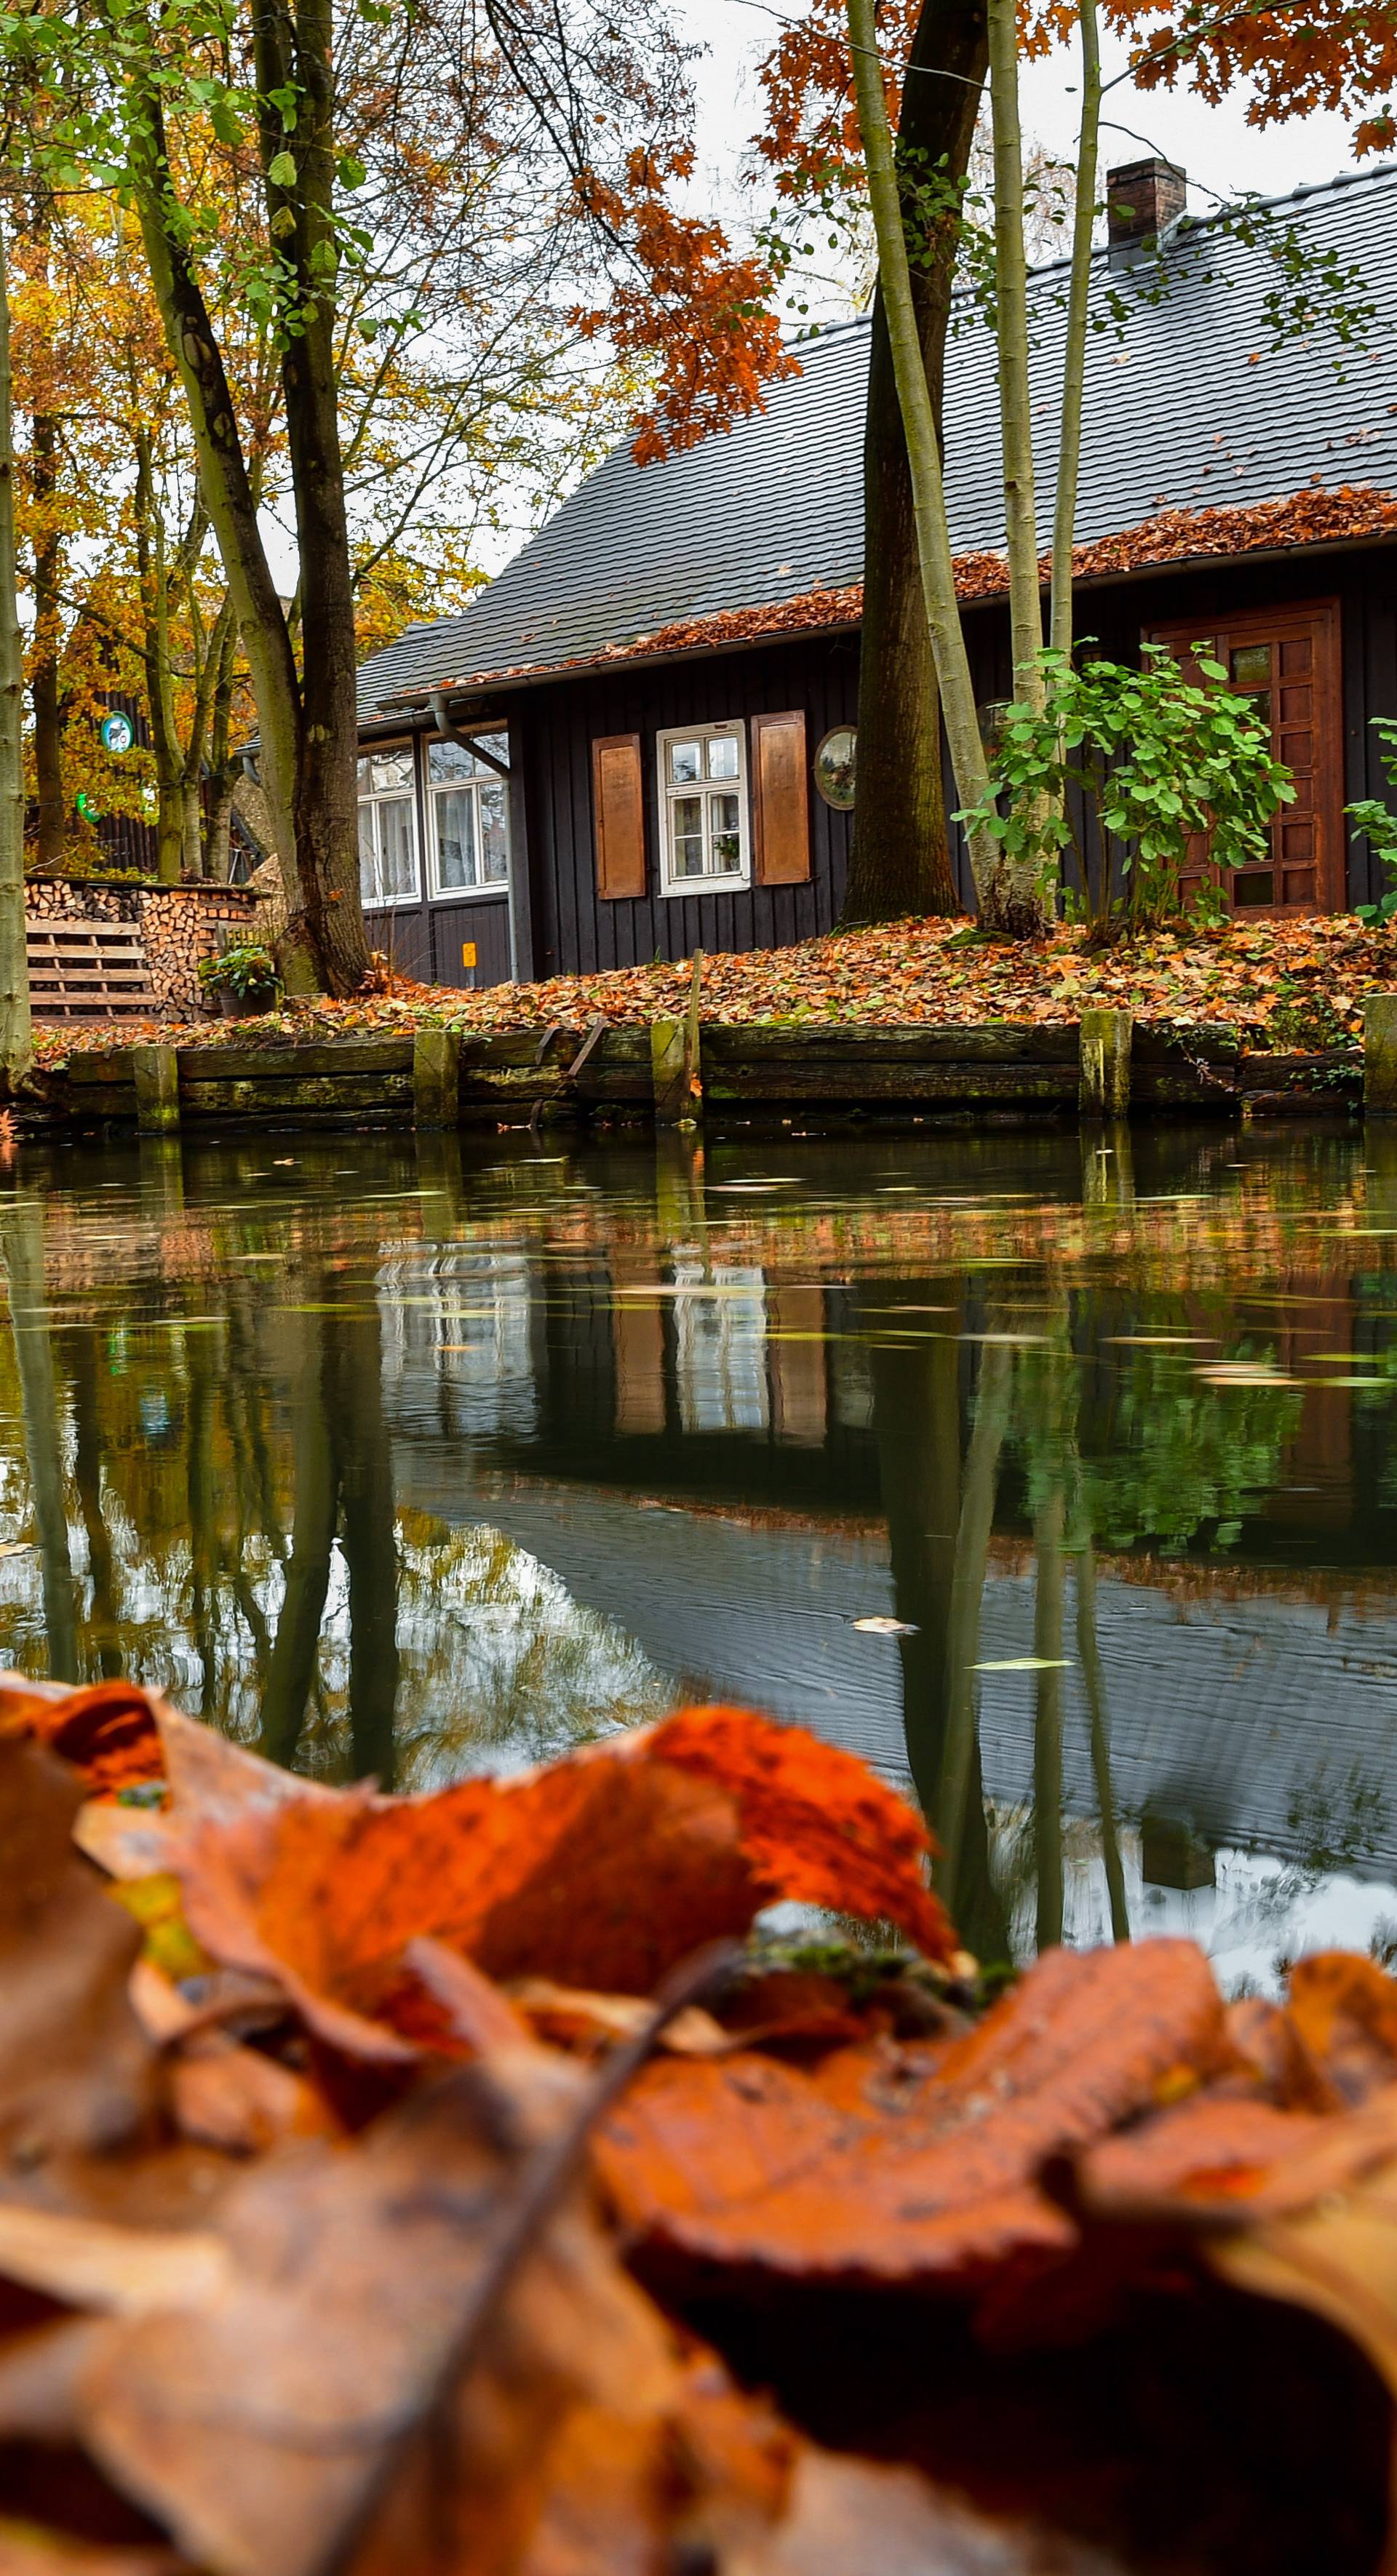 Autumn in Spreewald forest